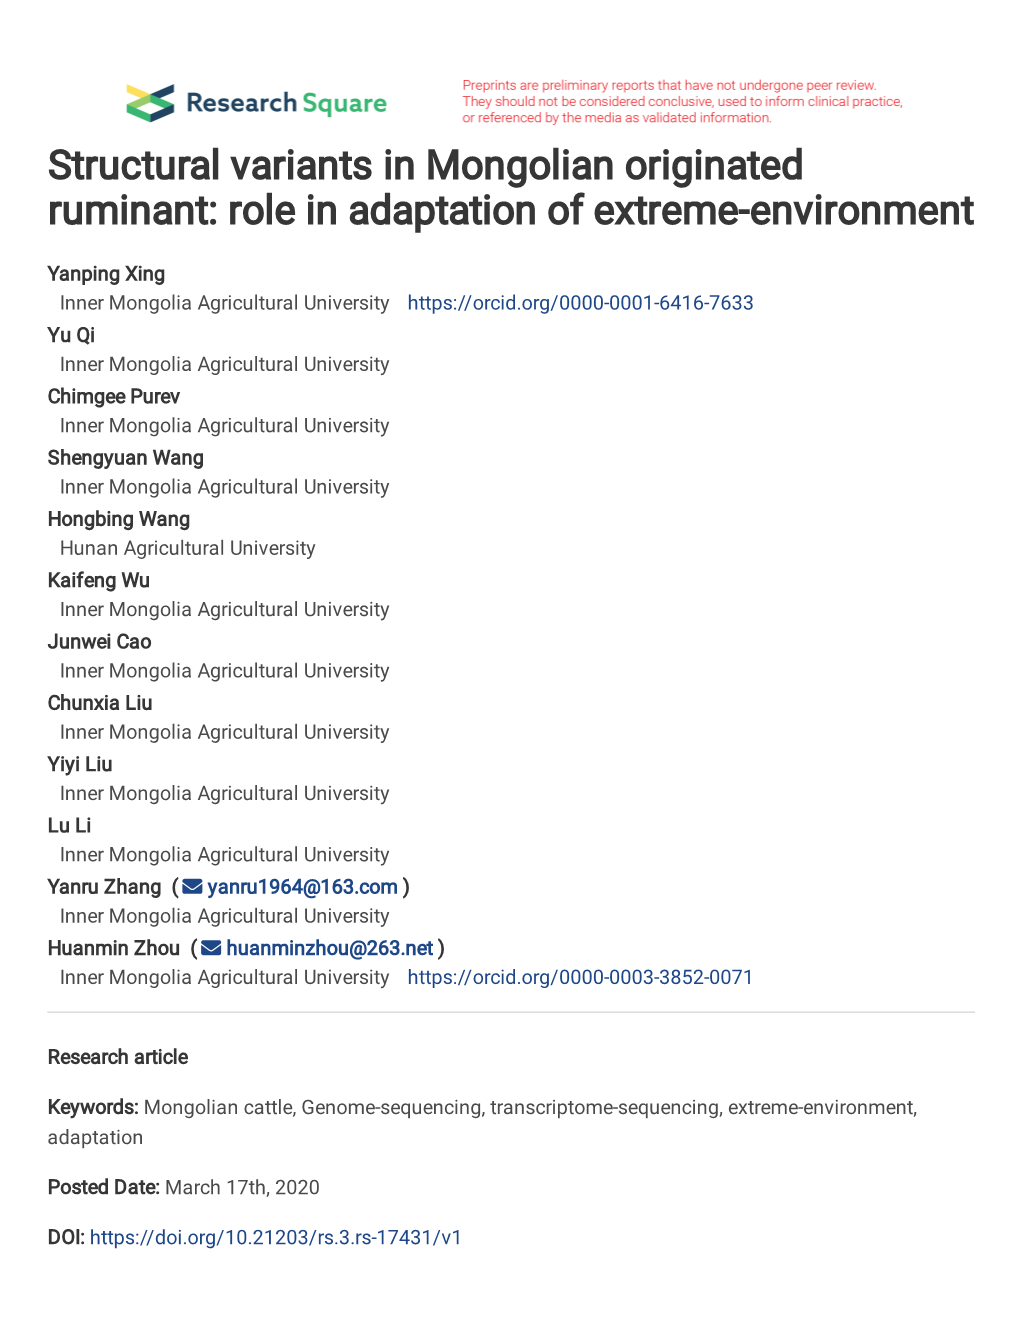 Structural Variants in Mongolian Originated Ruminant: Role in Adaptation of Extreme-Environment